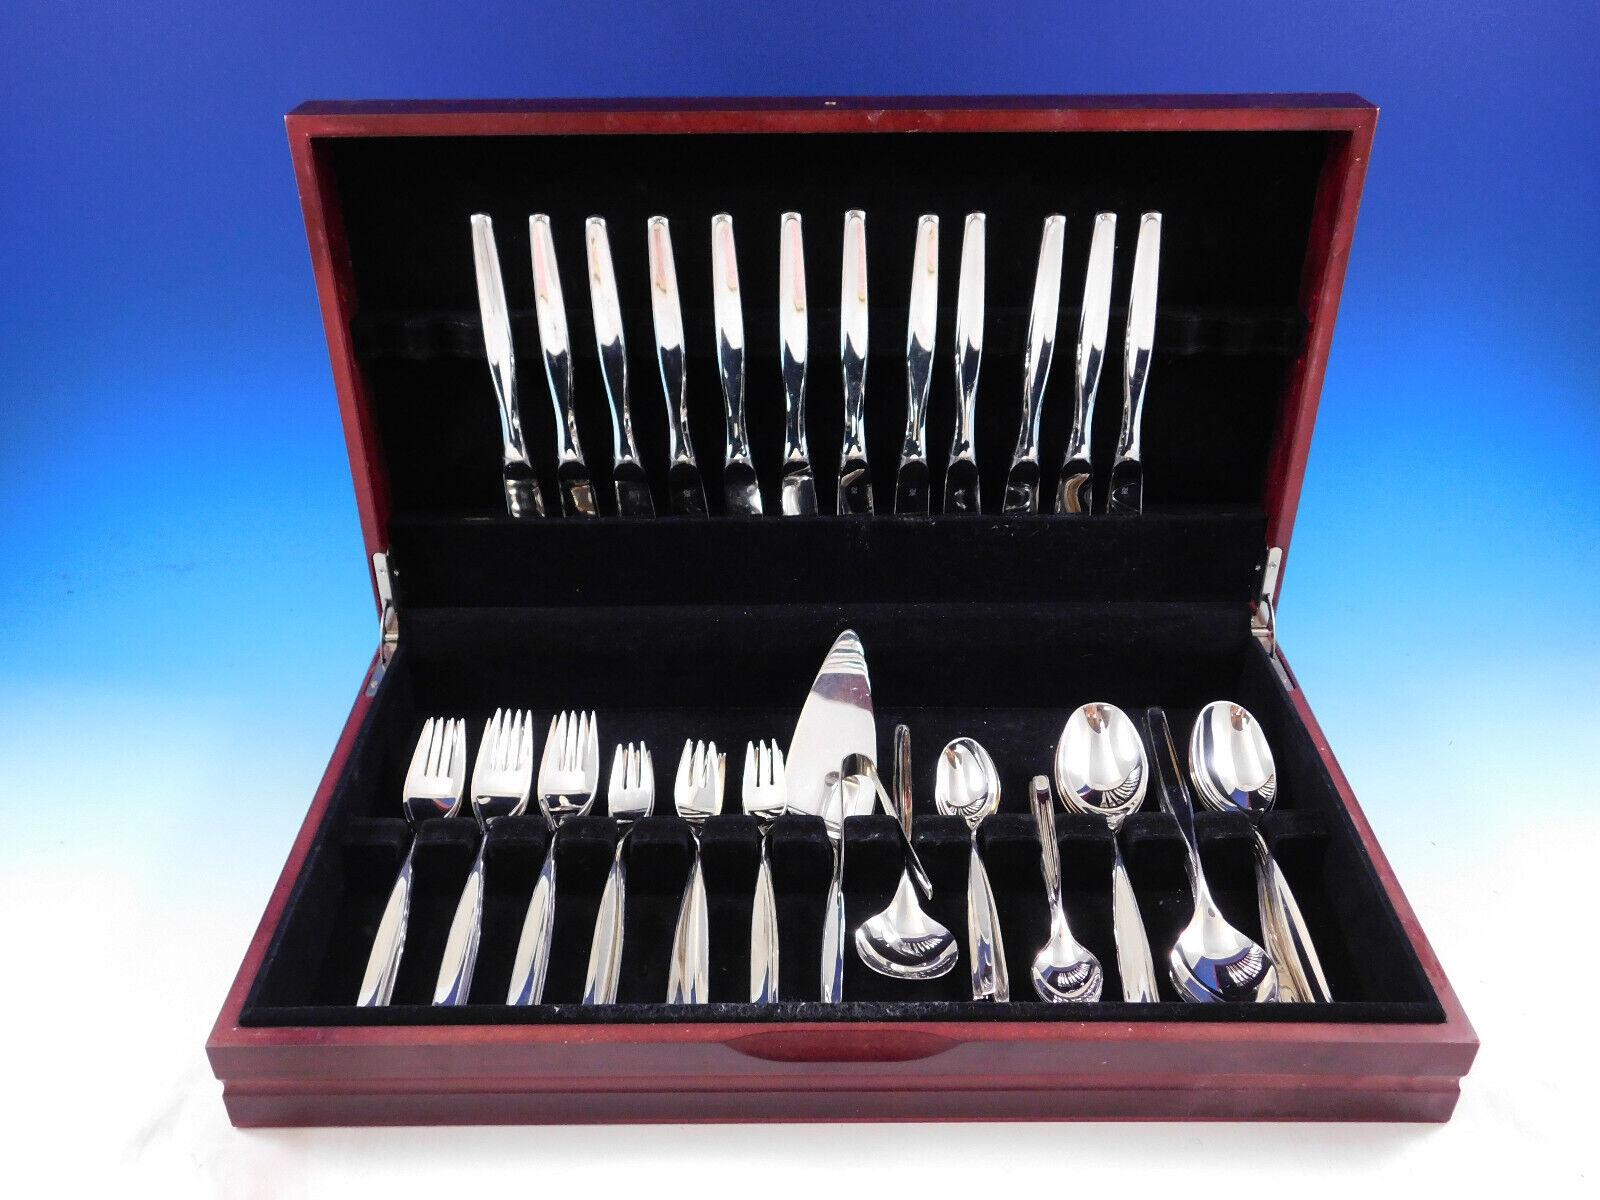 Mid-Century Modern Hamburg by WMF 800 silver German flatware set - 63 pieces. This set includes:

12 Knives, 8 3/4